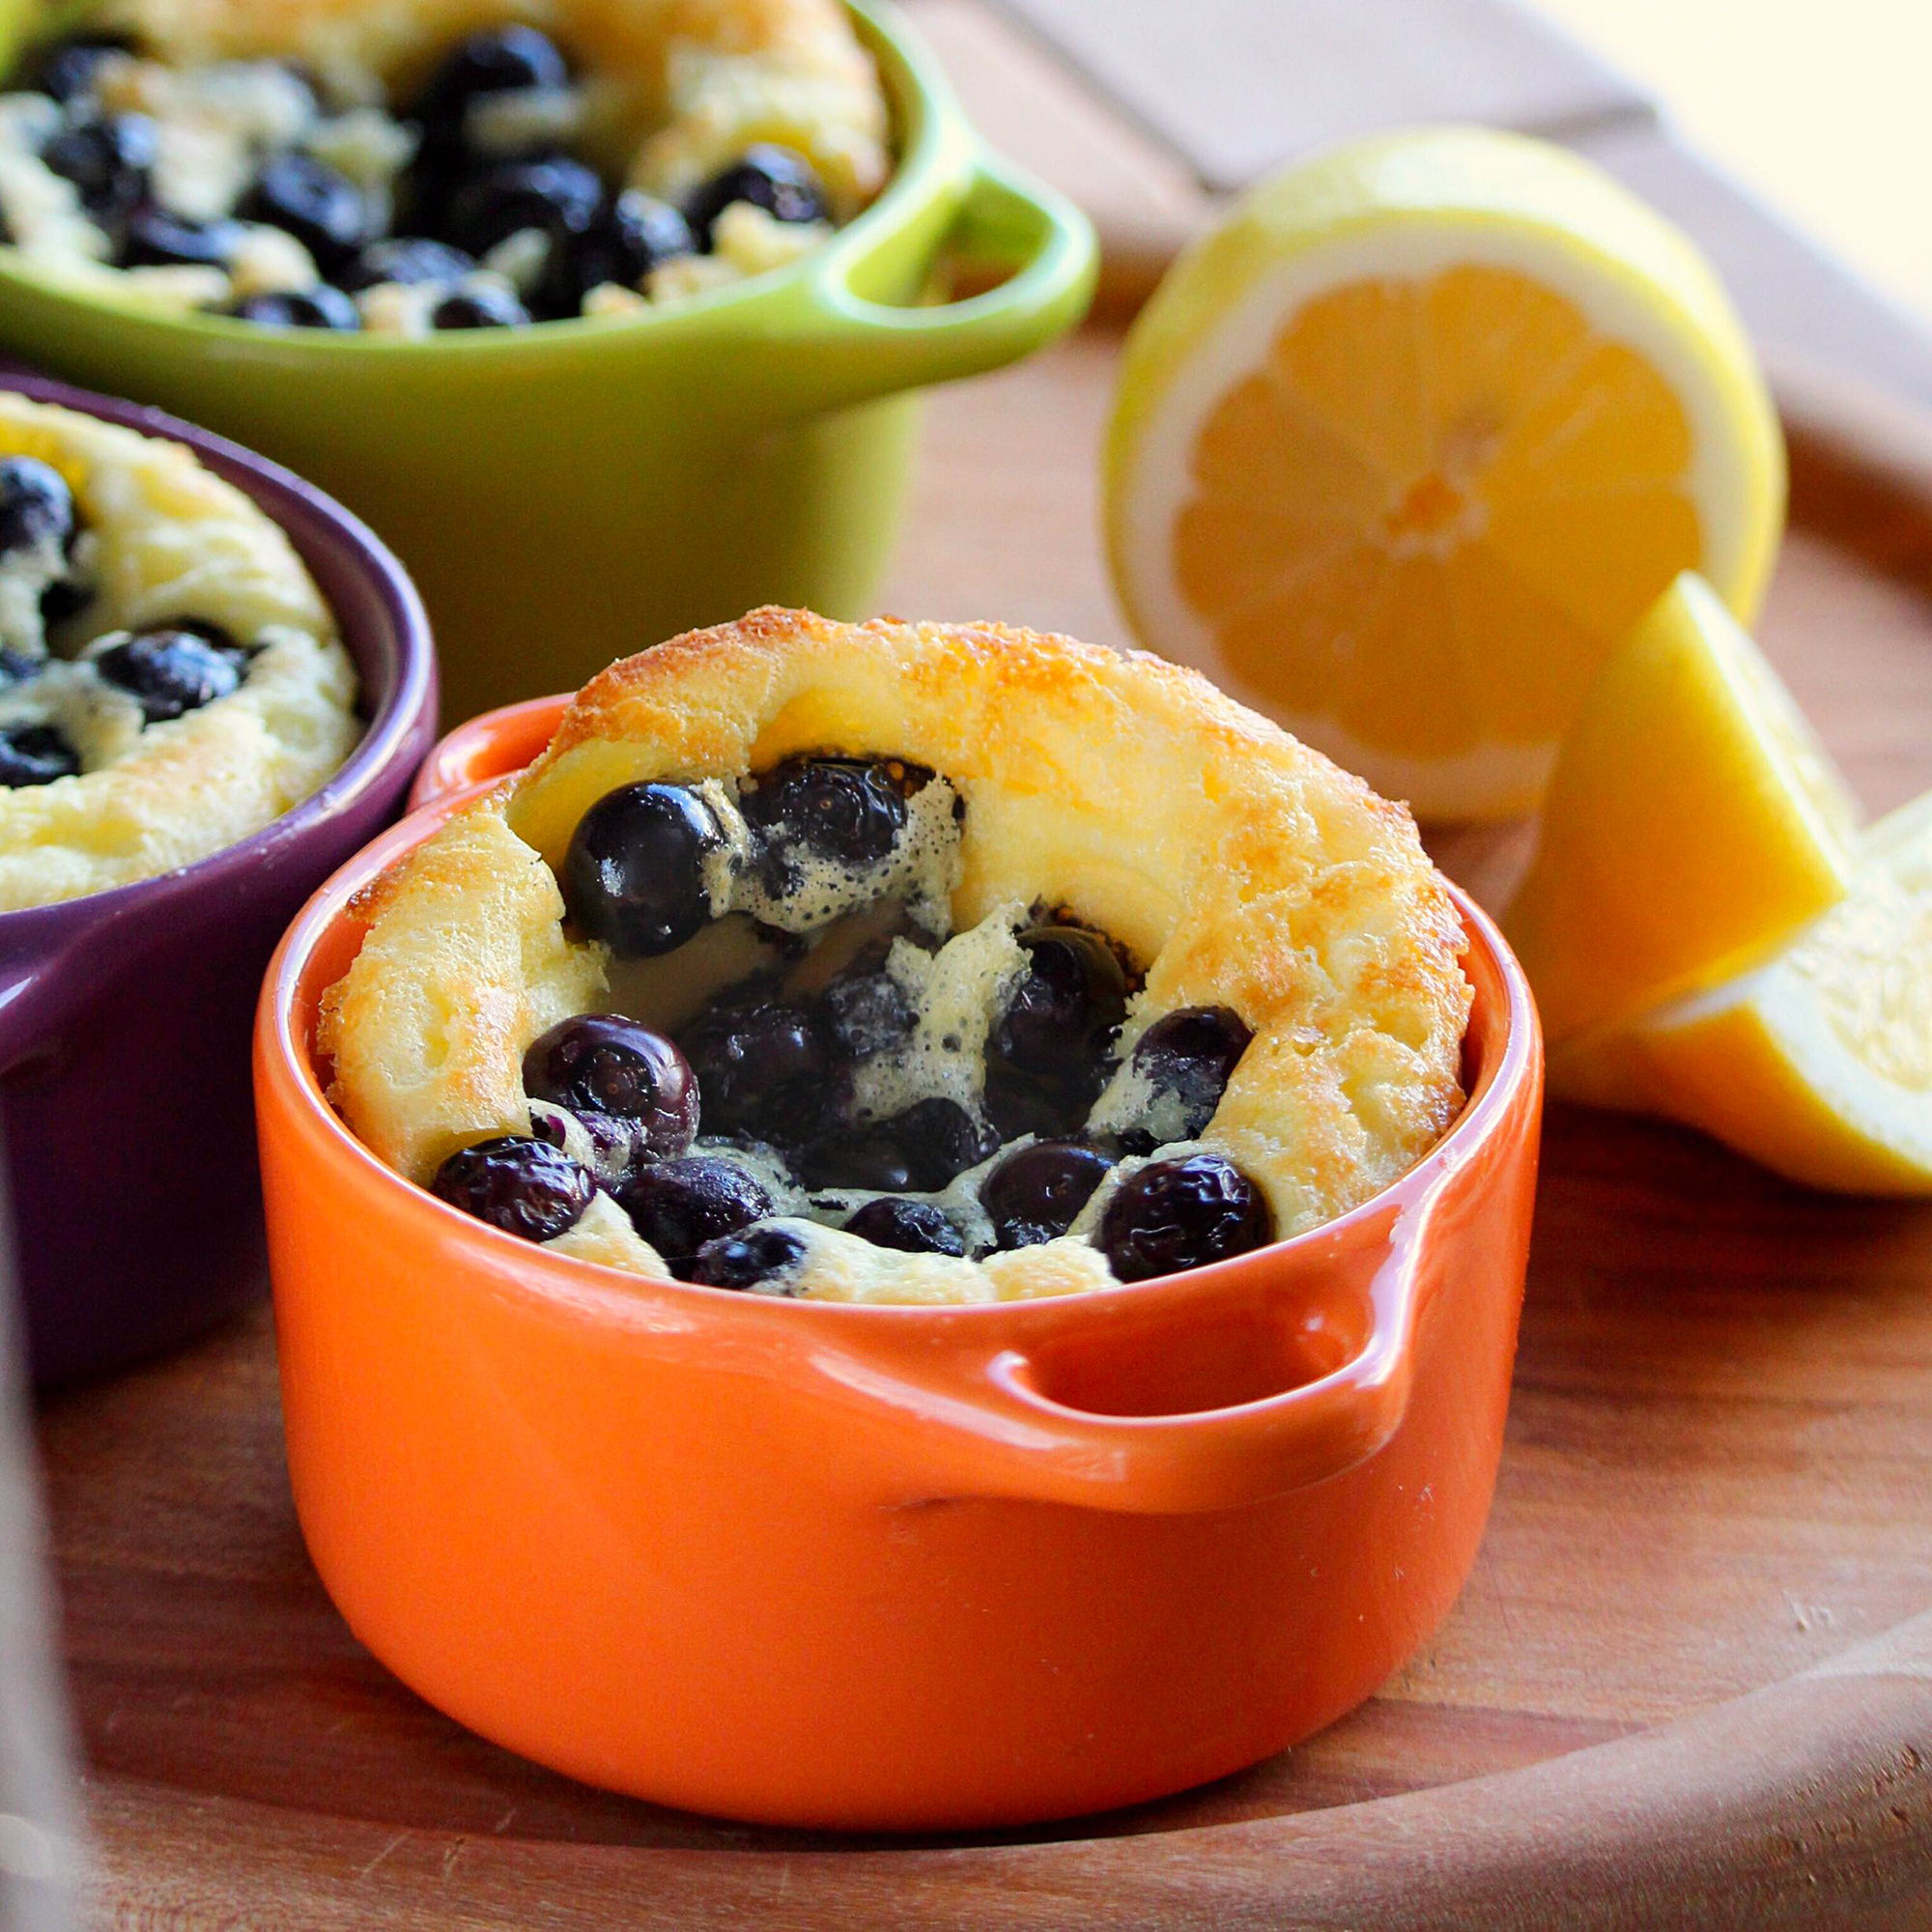 close up view of Blueberry Popovers in orange, purple and green ramekins, next to lemon wedges on a wooden board